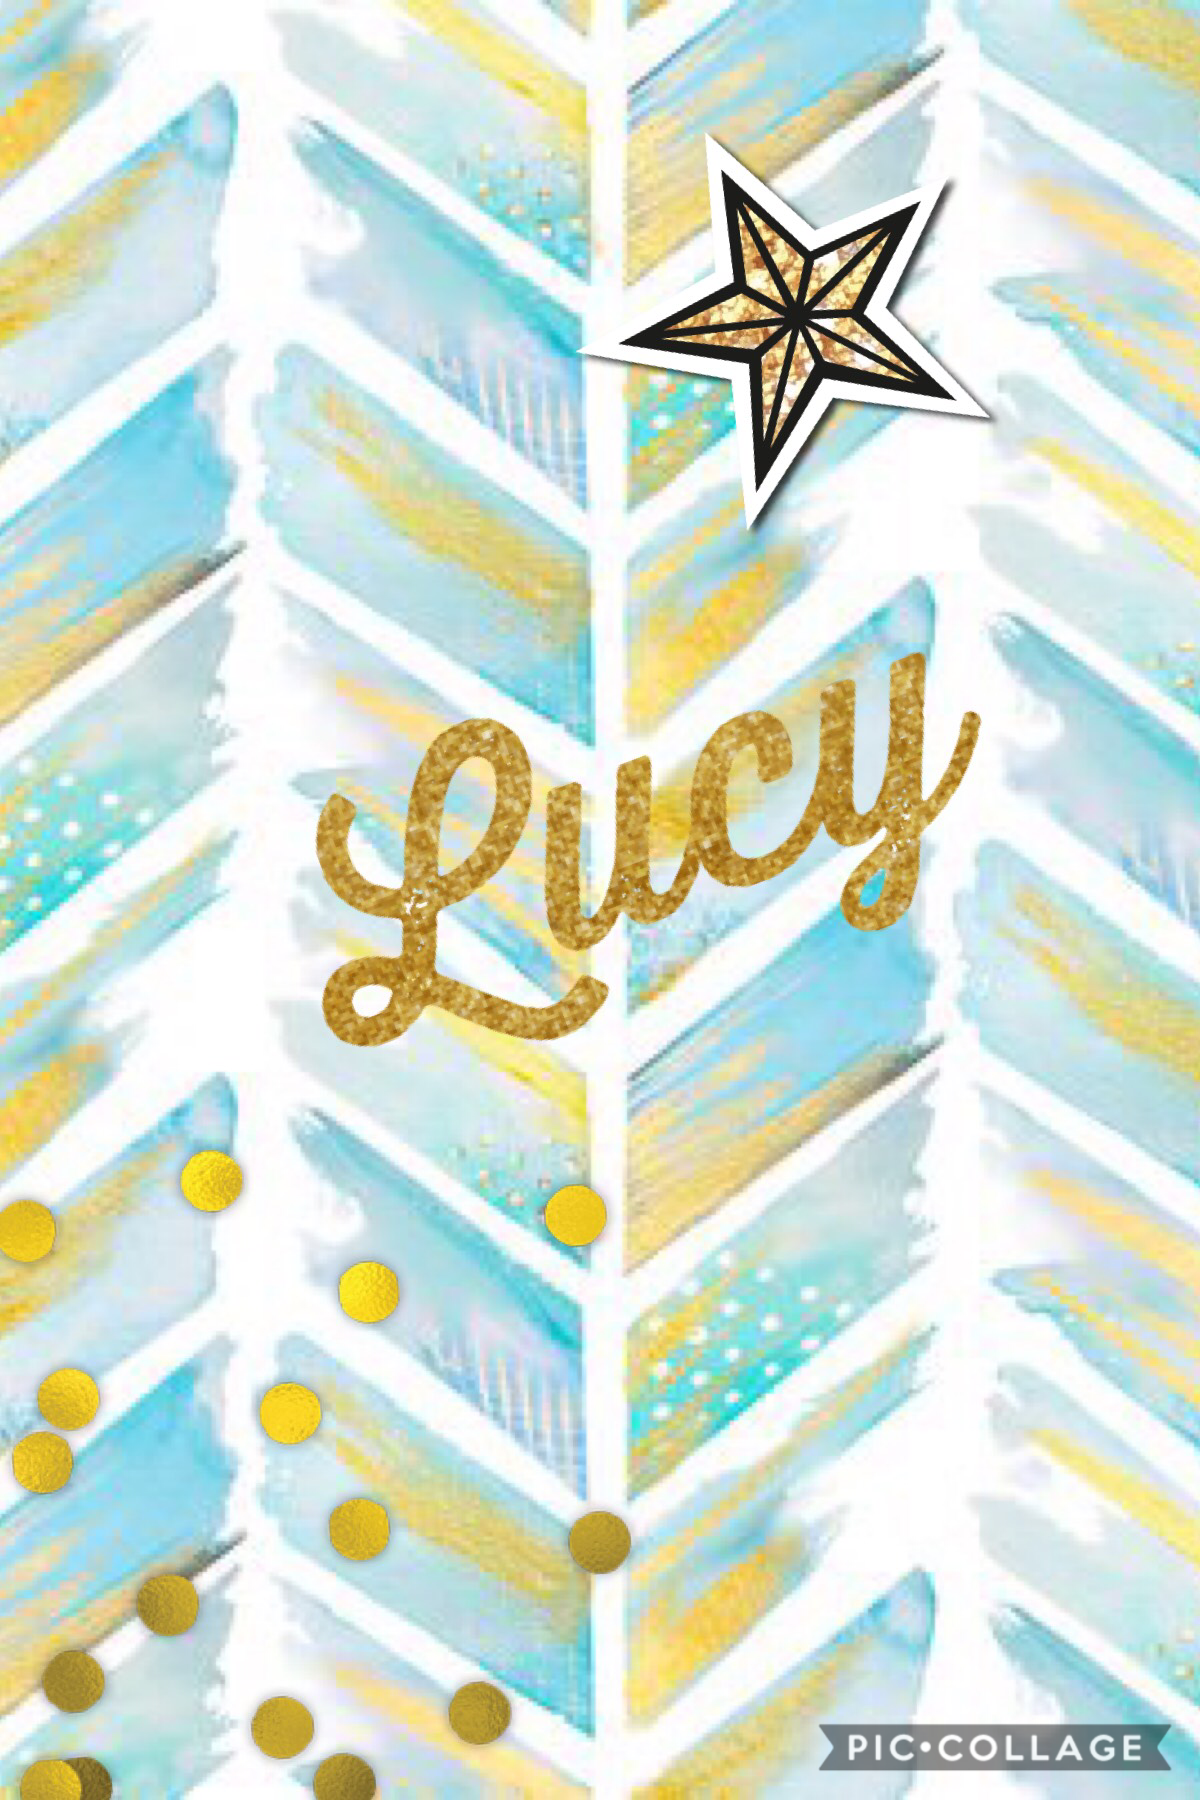 For all the Lucy’s out there...